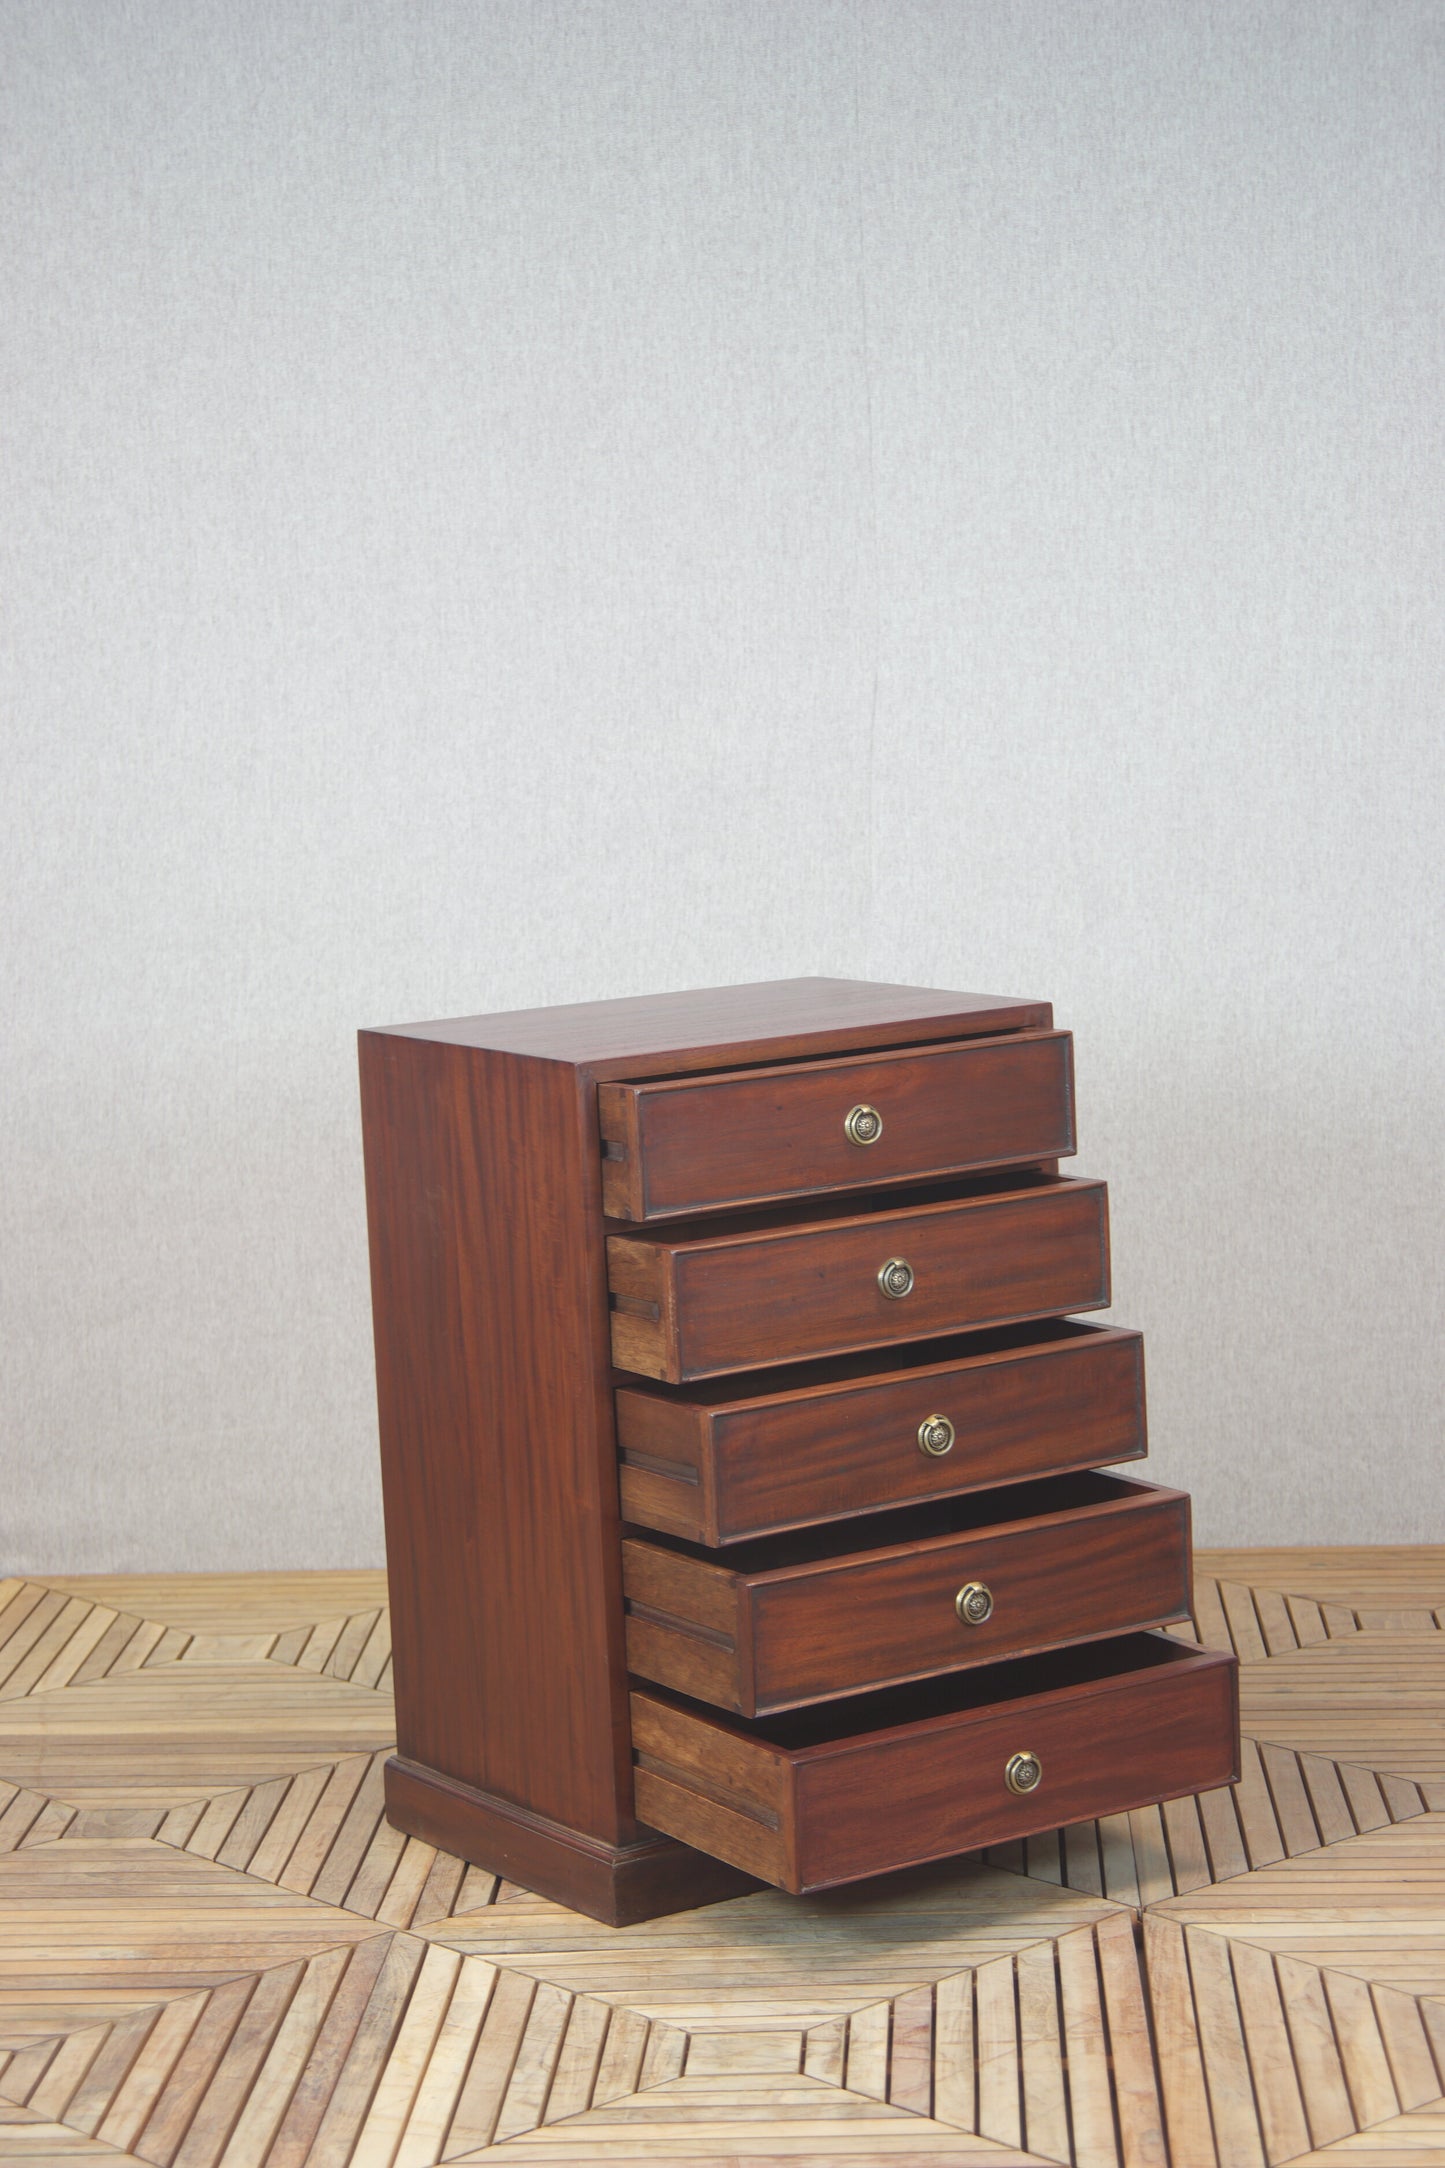 Sleight Chest of Drawers